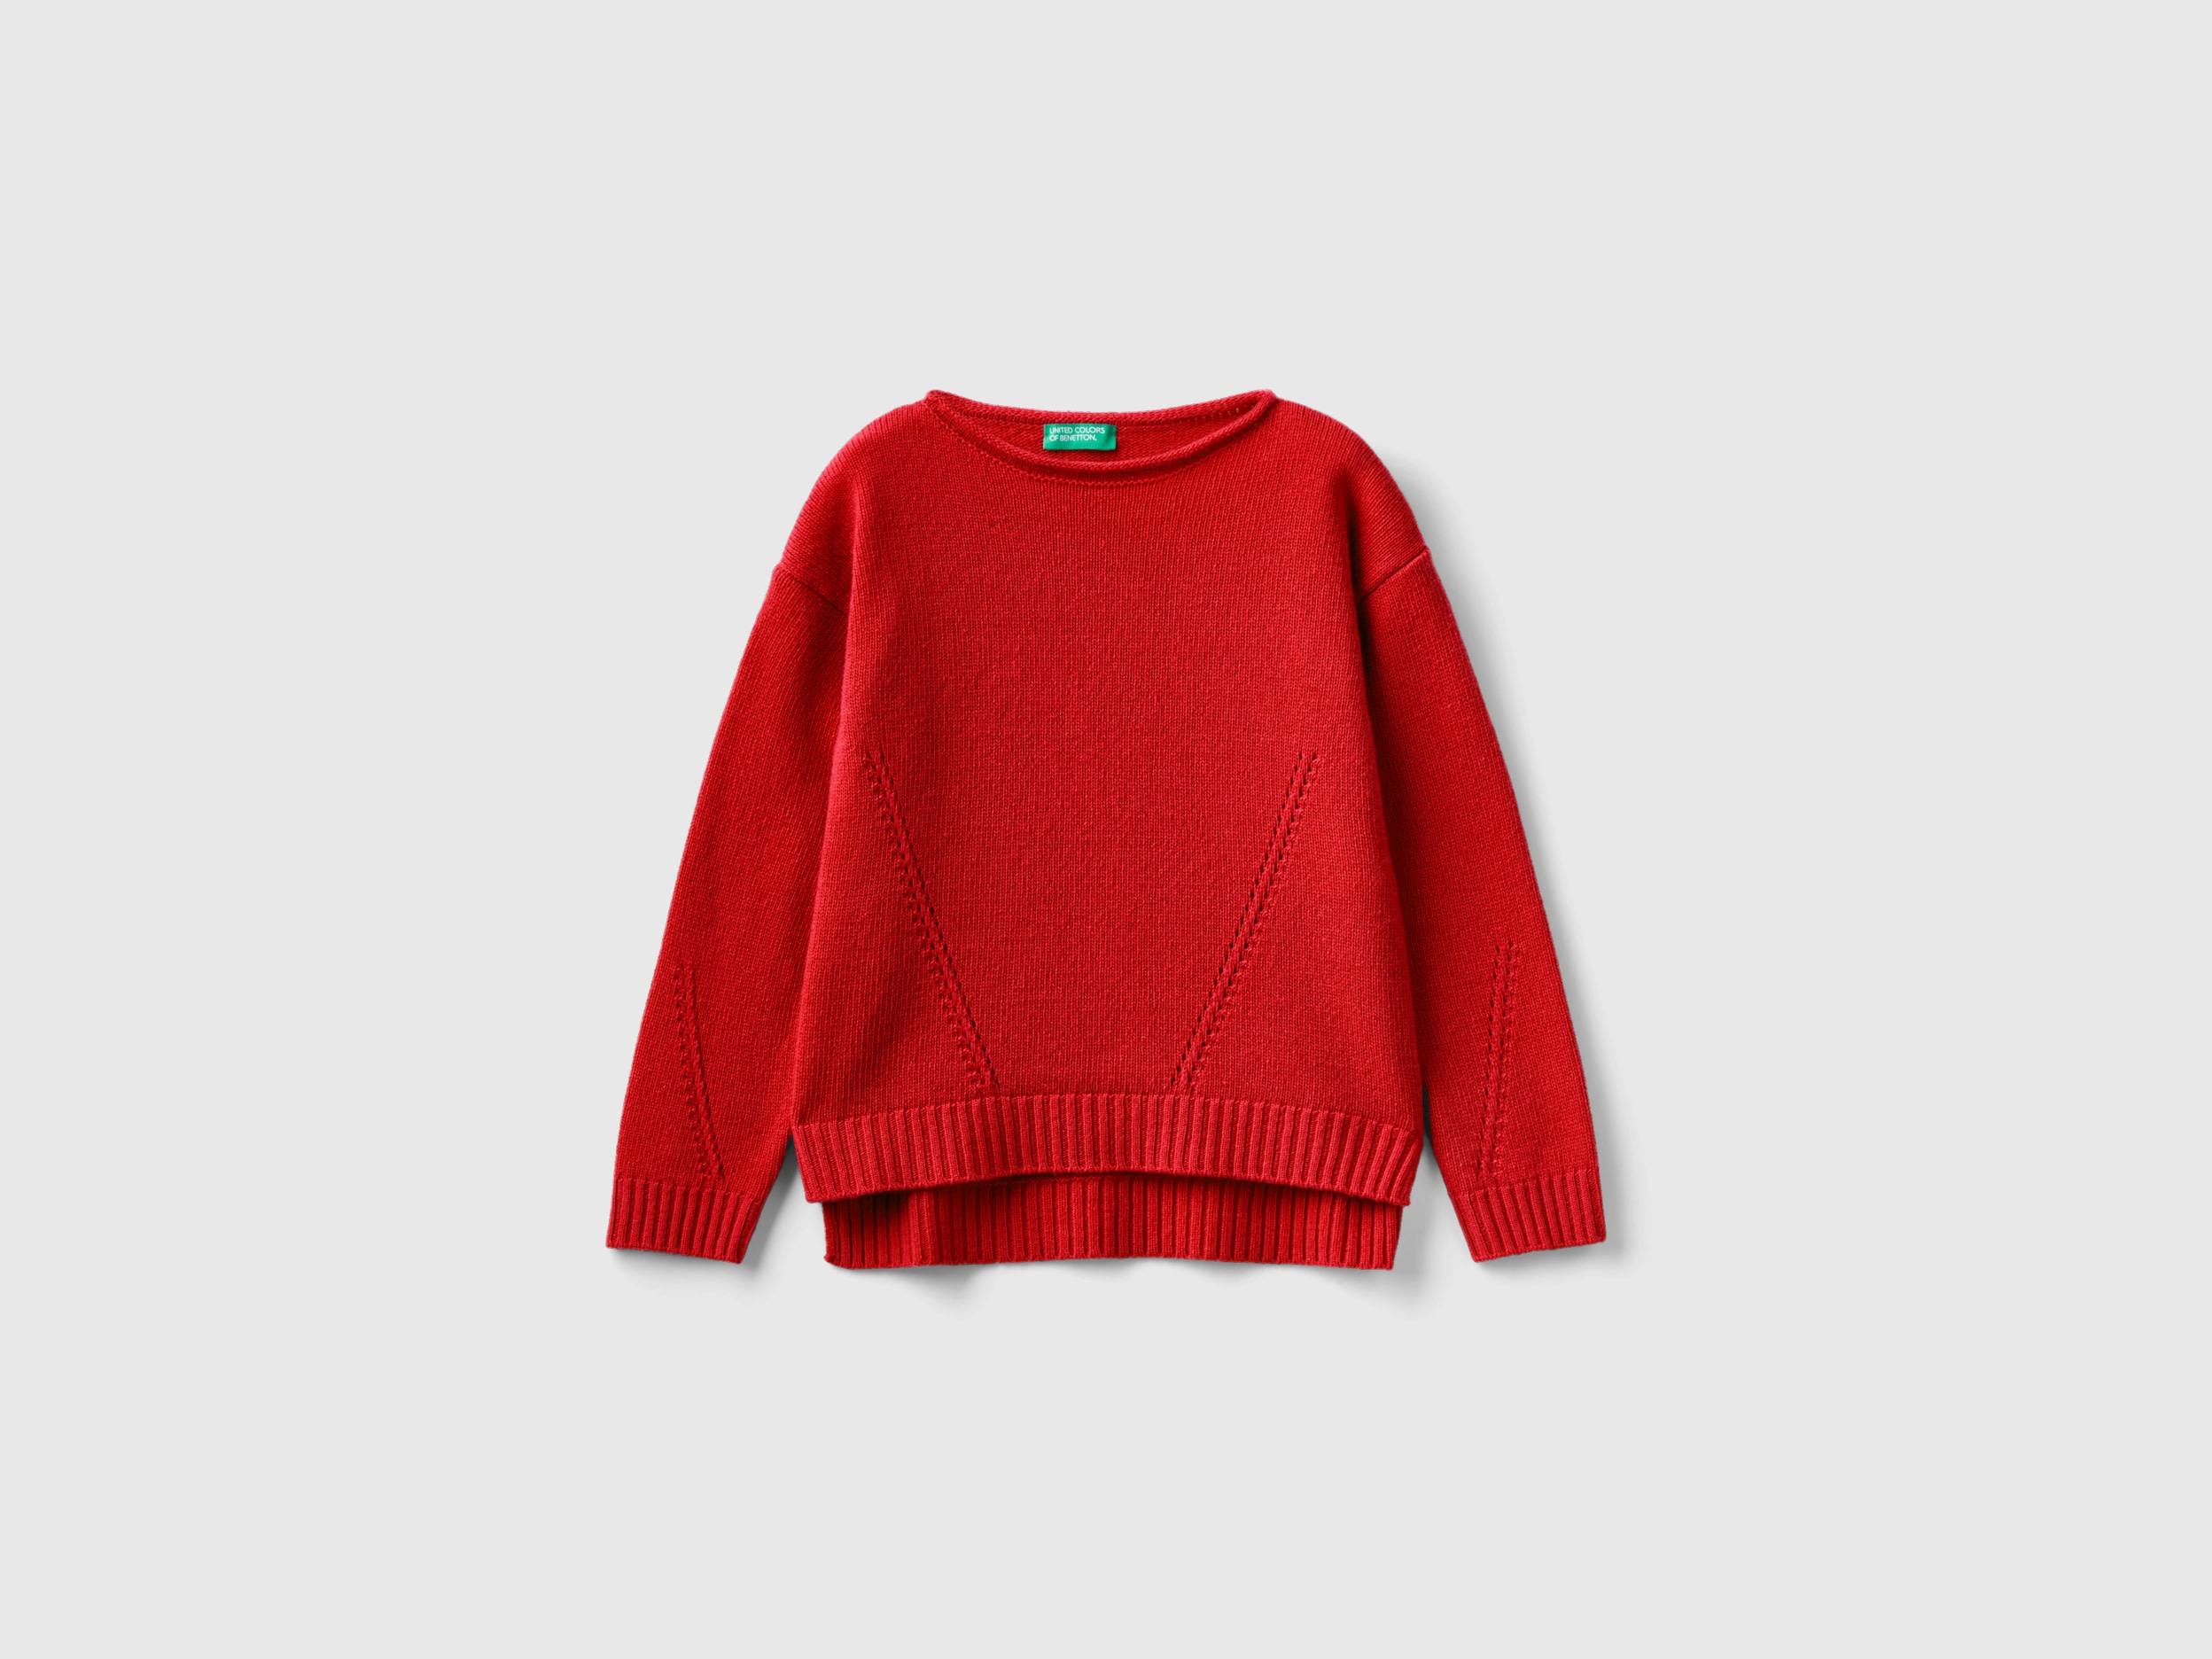 Benetton, Knit Sweater With Playful Stitching, size 3XL, Red, Kids